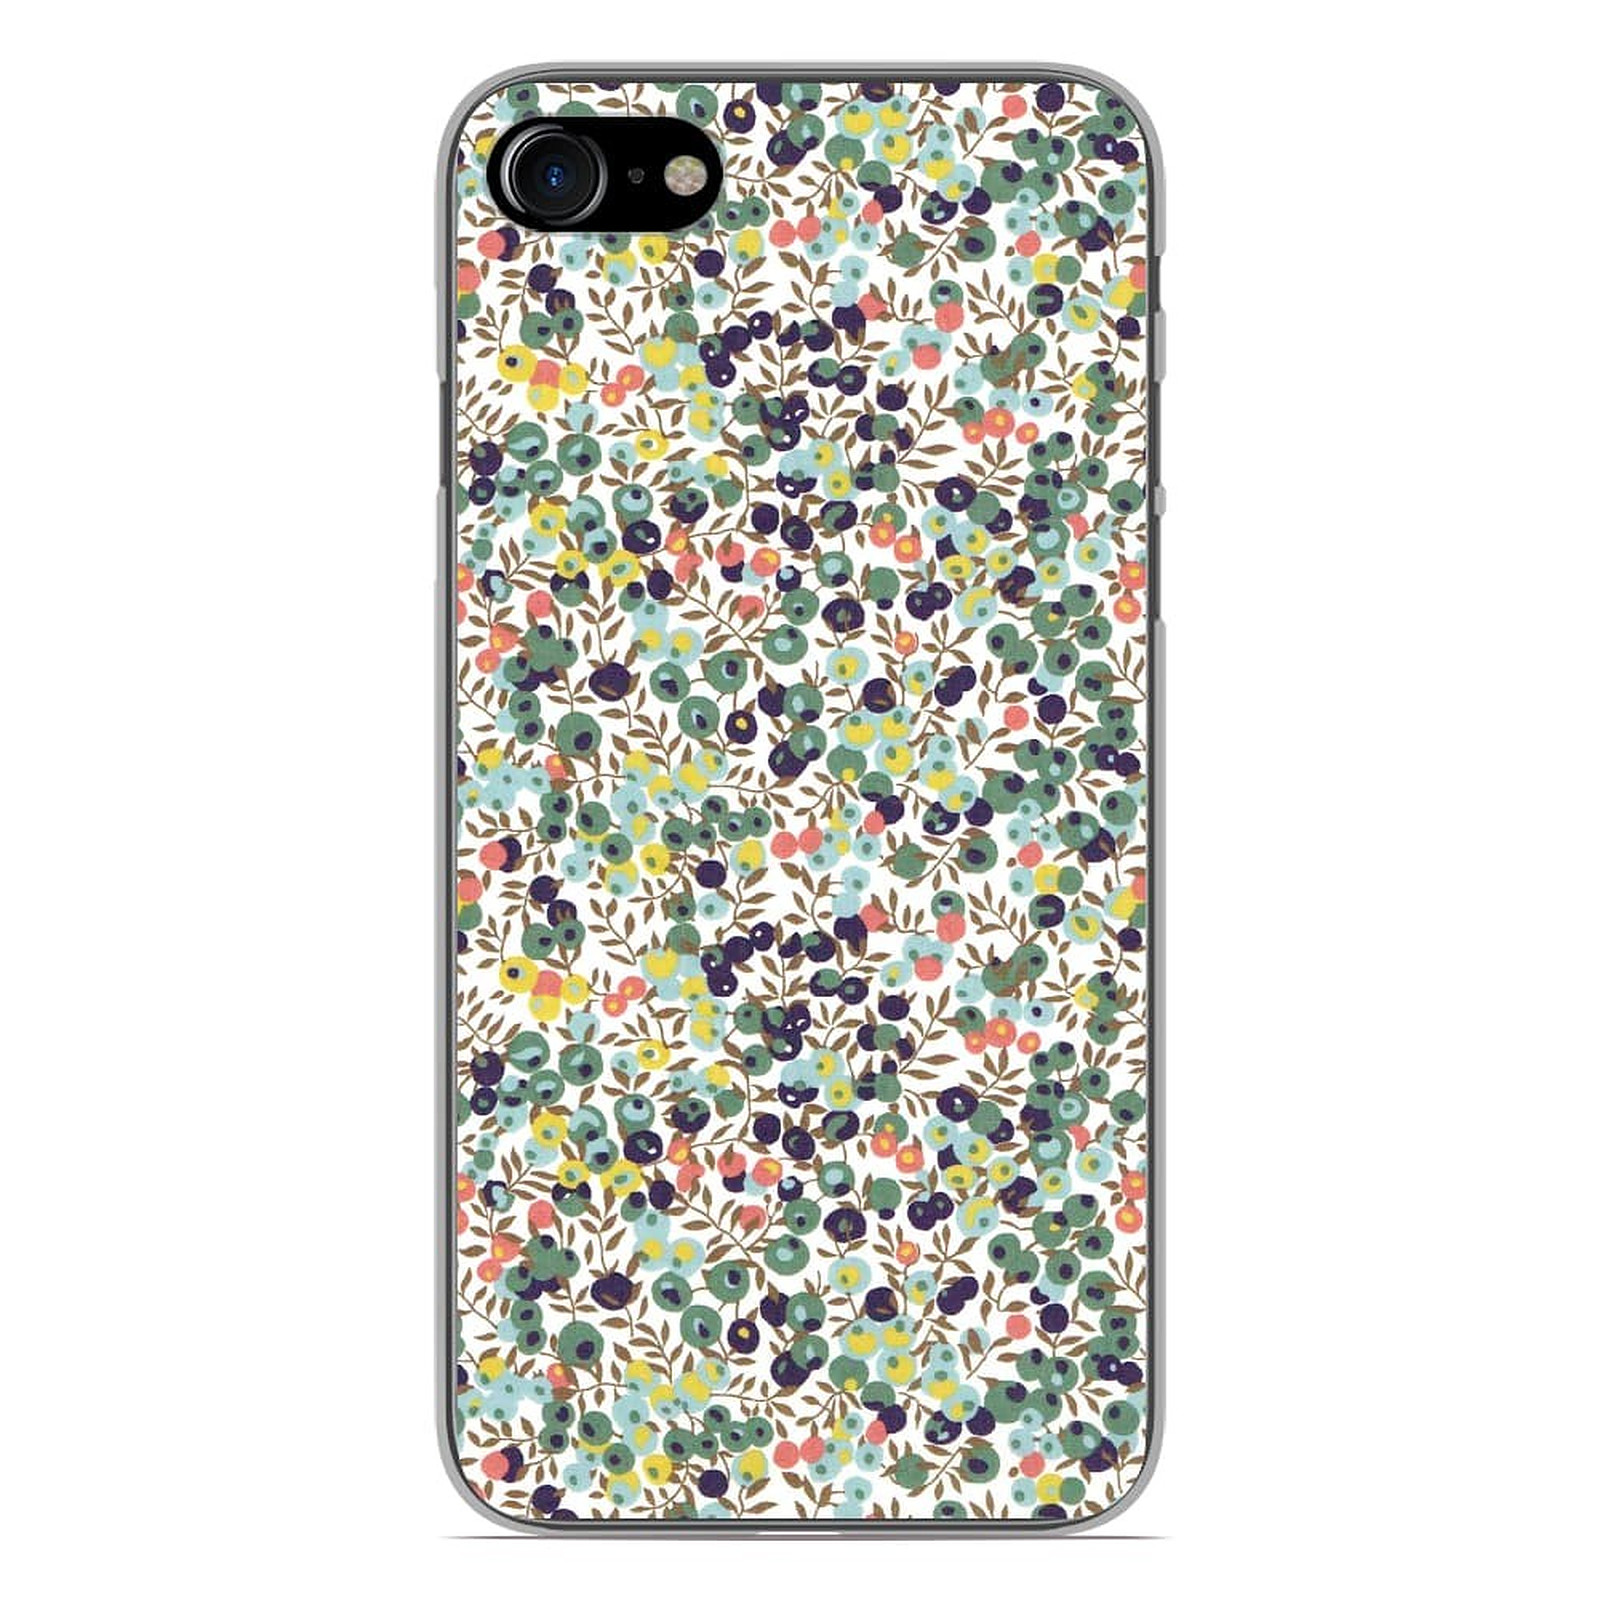 1001 Coques Coque silicone gel Apple iPhone 8 motif Liberty Wiltshire Vert - Coque telephone 1001Coques